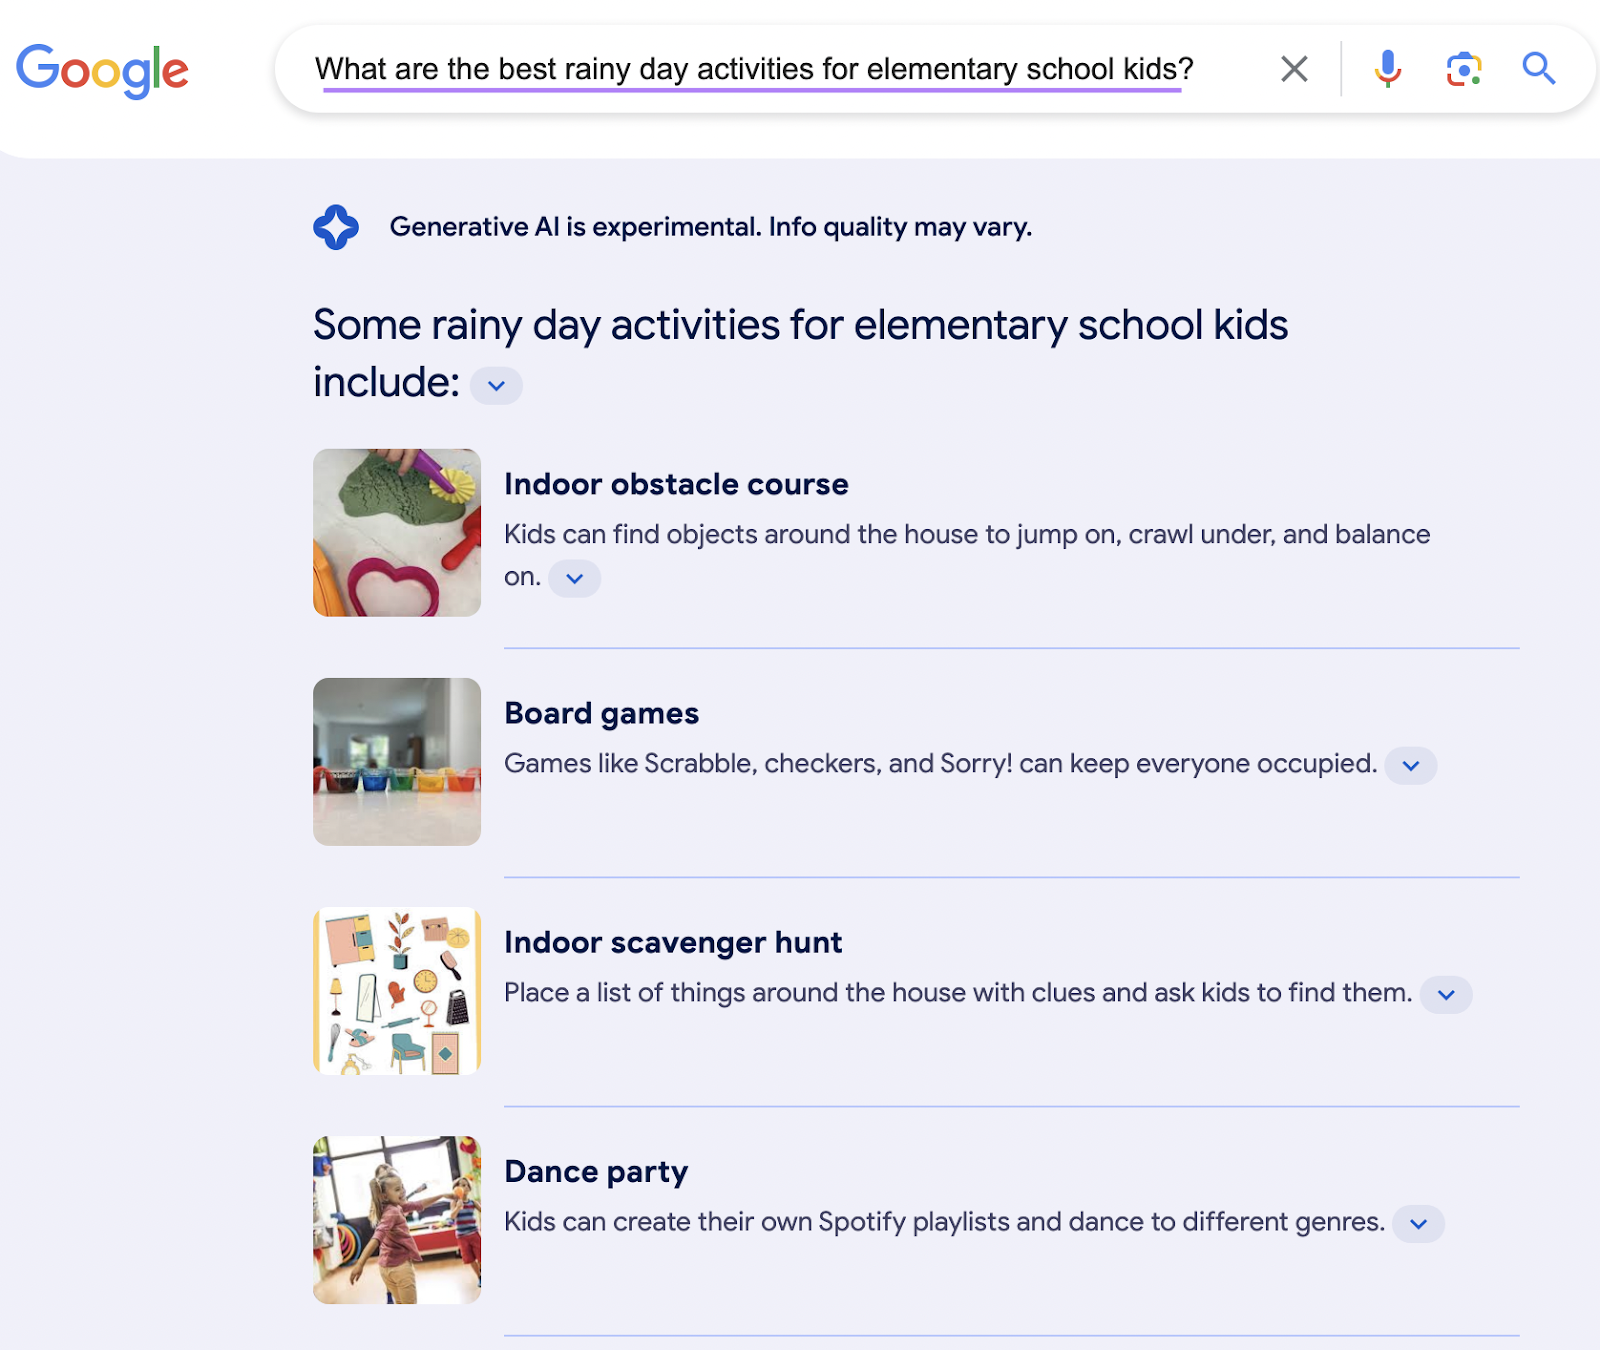 "What are the best rainy day activities for elementary school kids" query on Bard